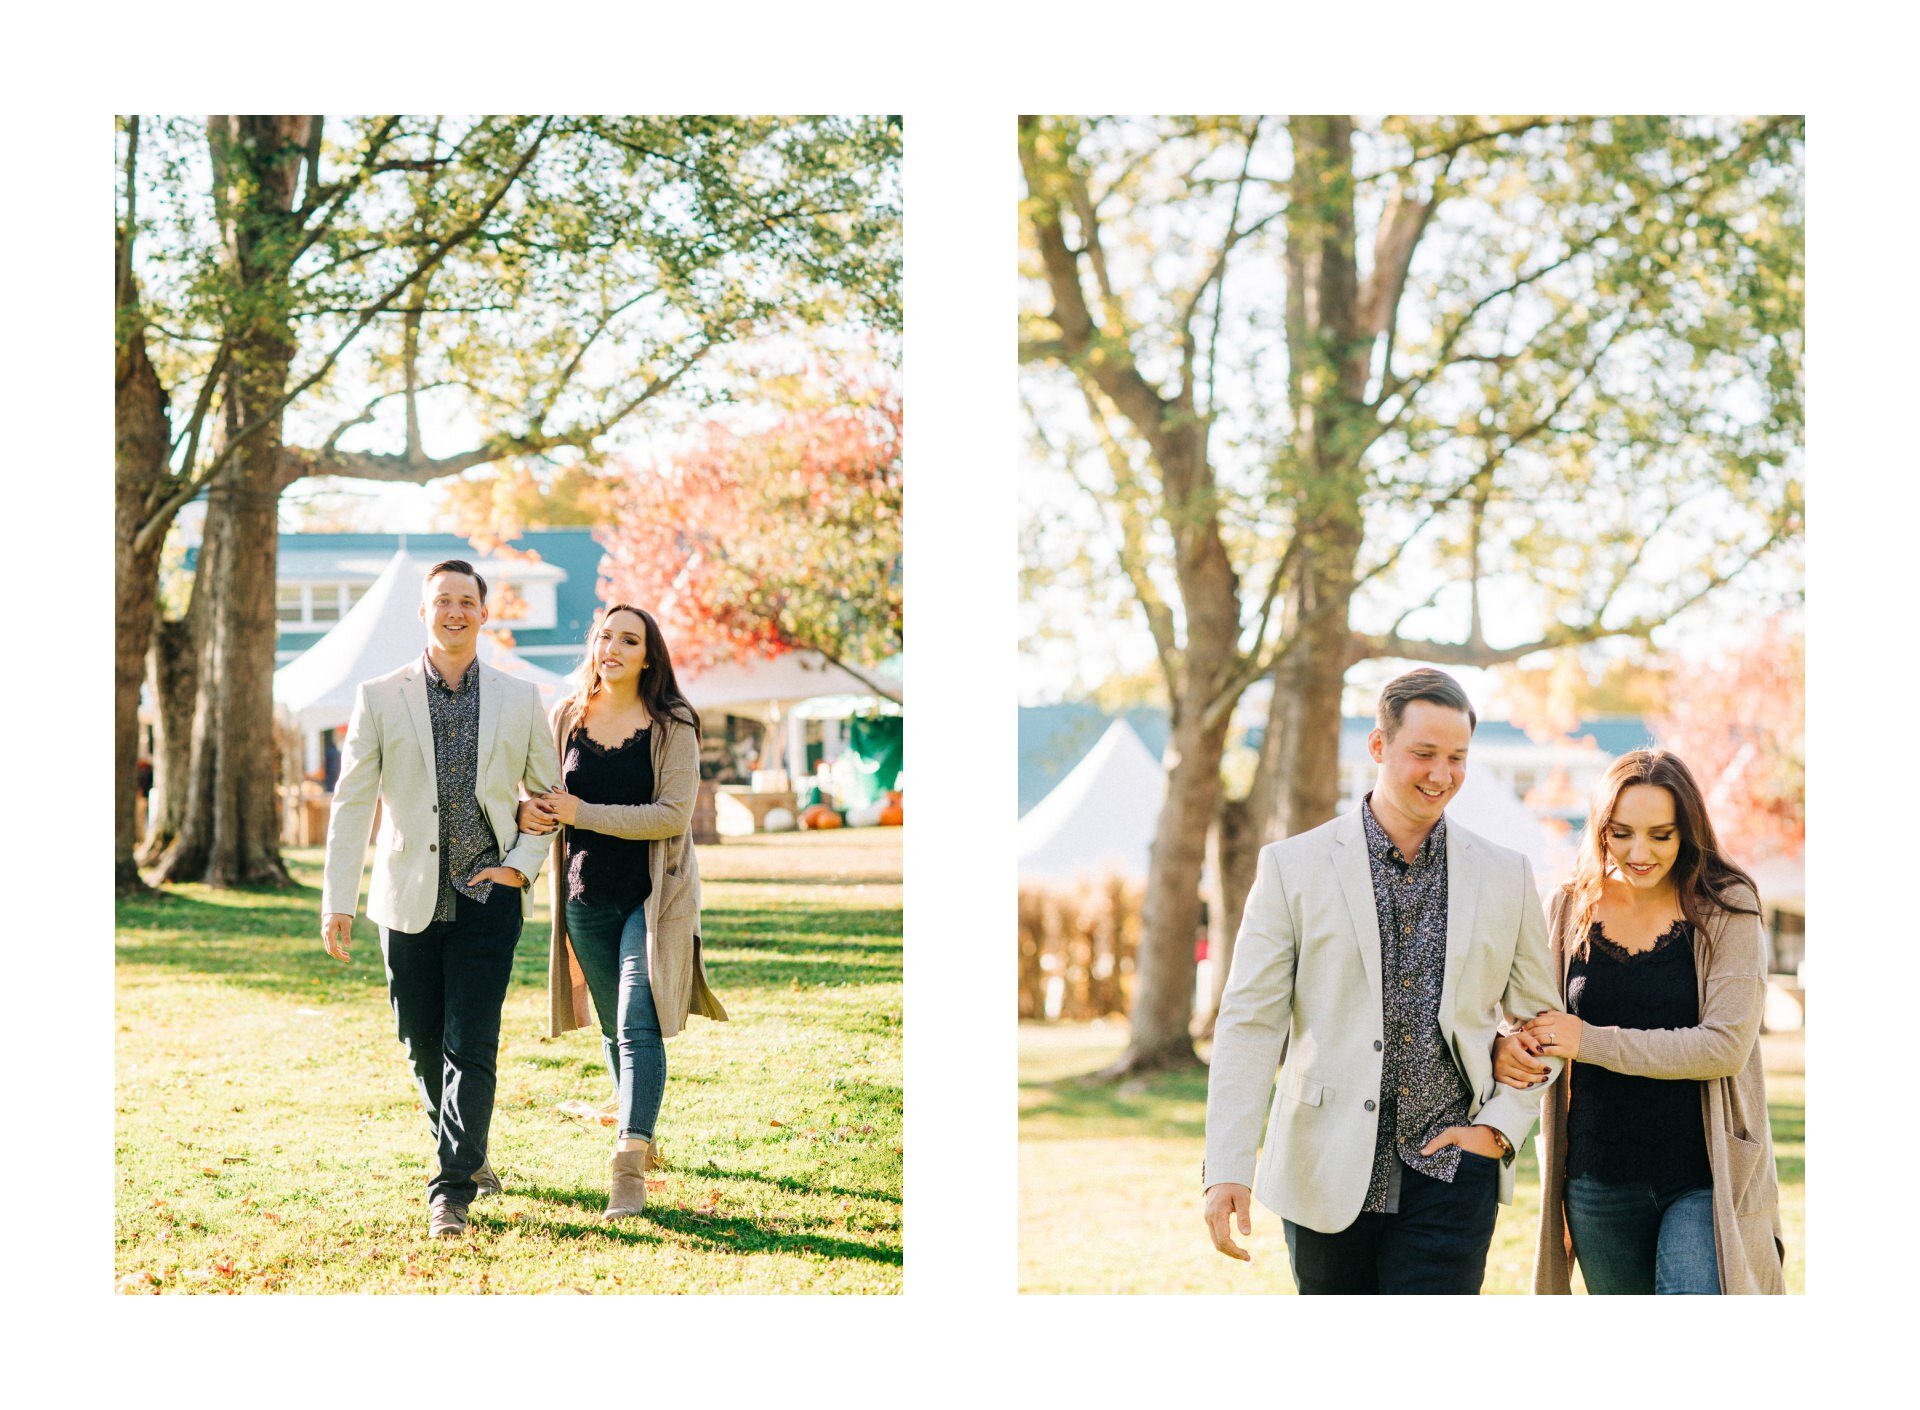 Cleveland Fall Engagement Photos at Patterson Fall Festival 6.jpg